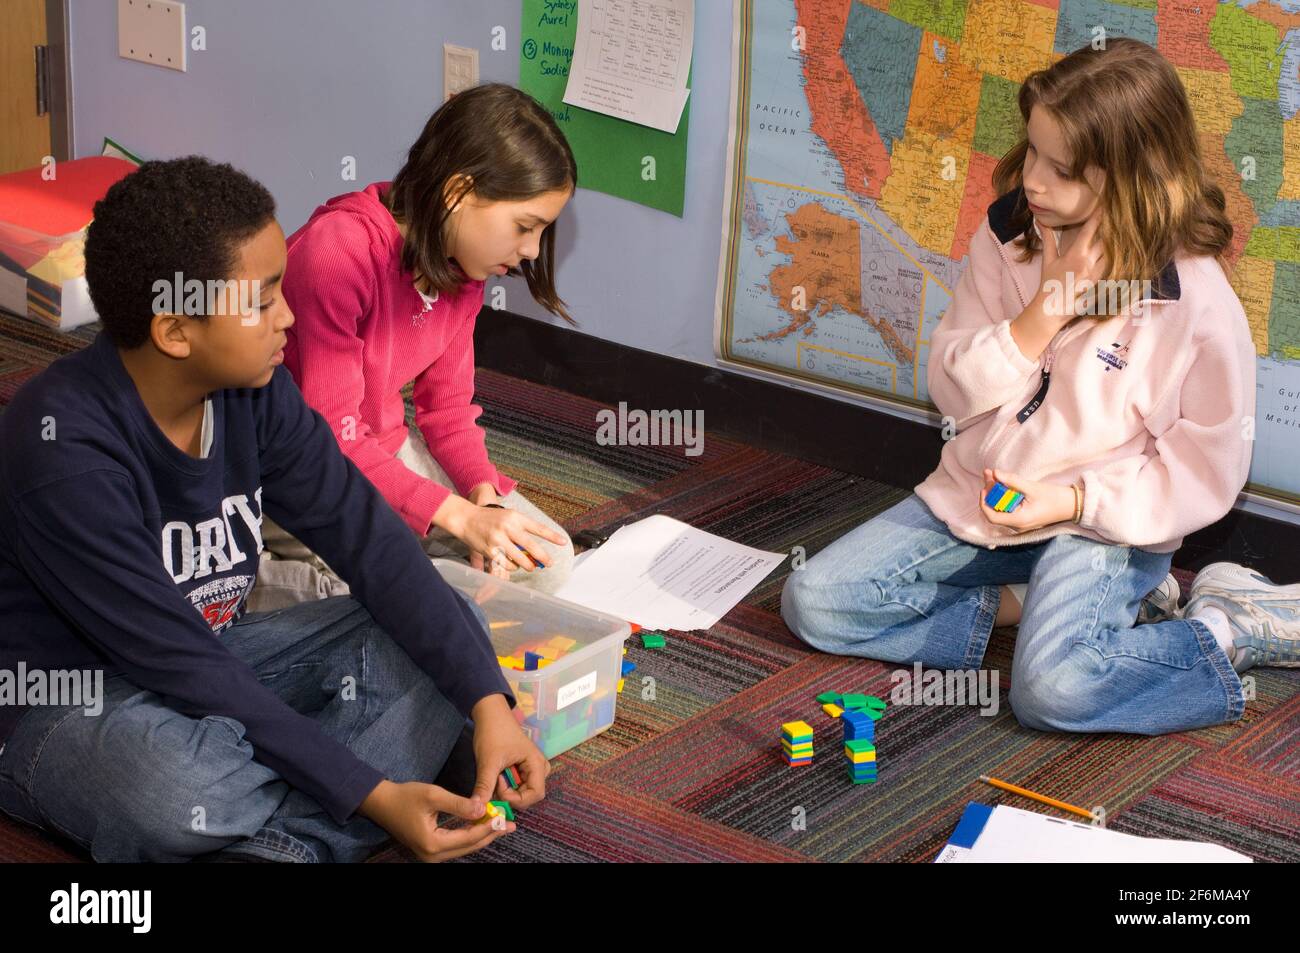 independent elementary school Grade 4 ages 9-10 mathematics group of two girls and a boy working together problems using math manipulatives Stock Photo